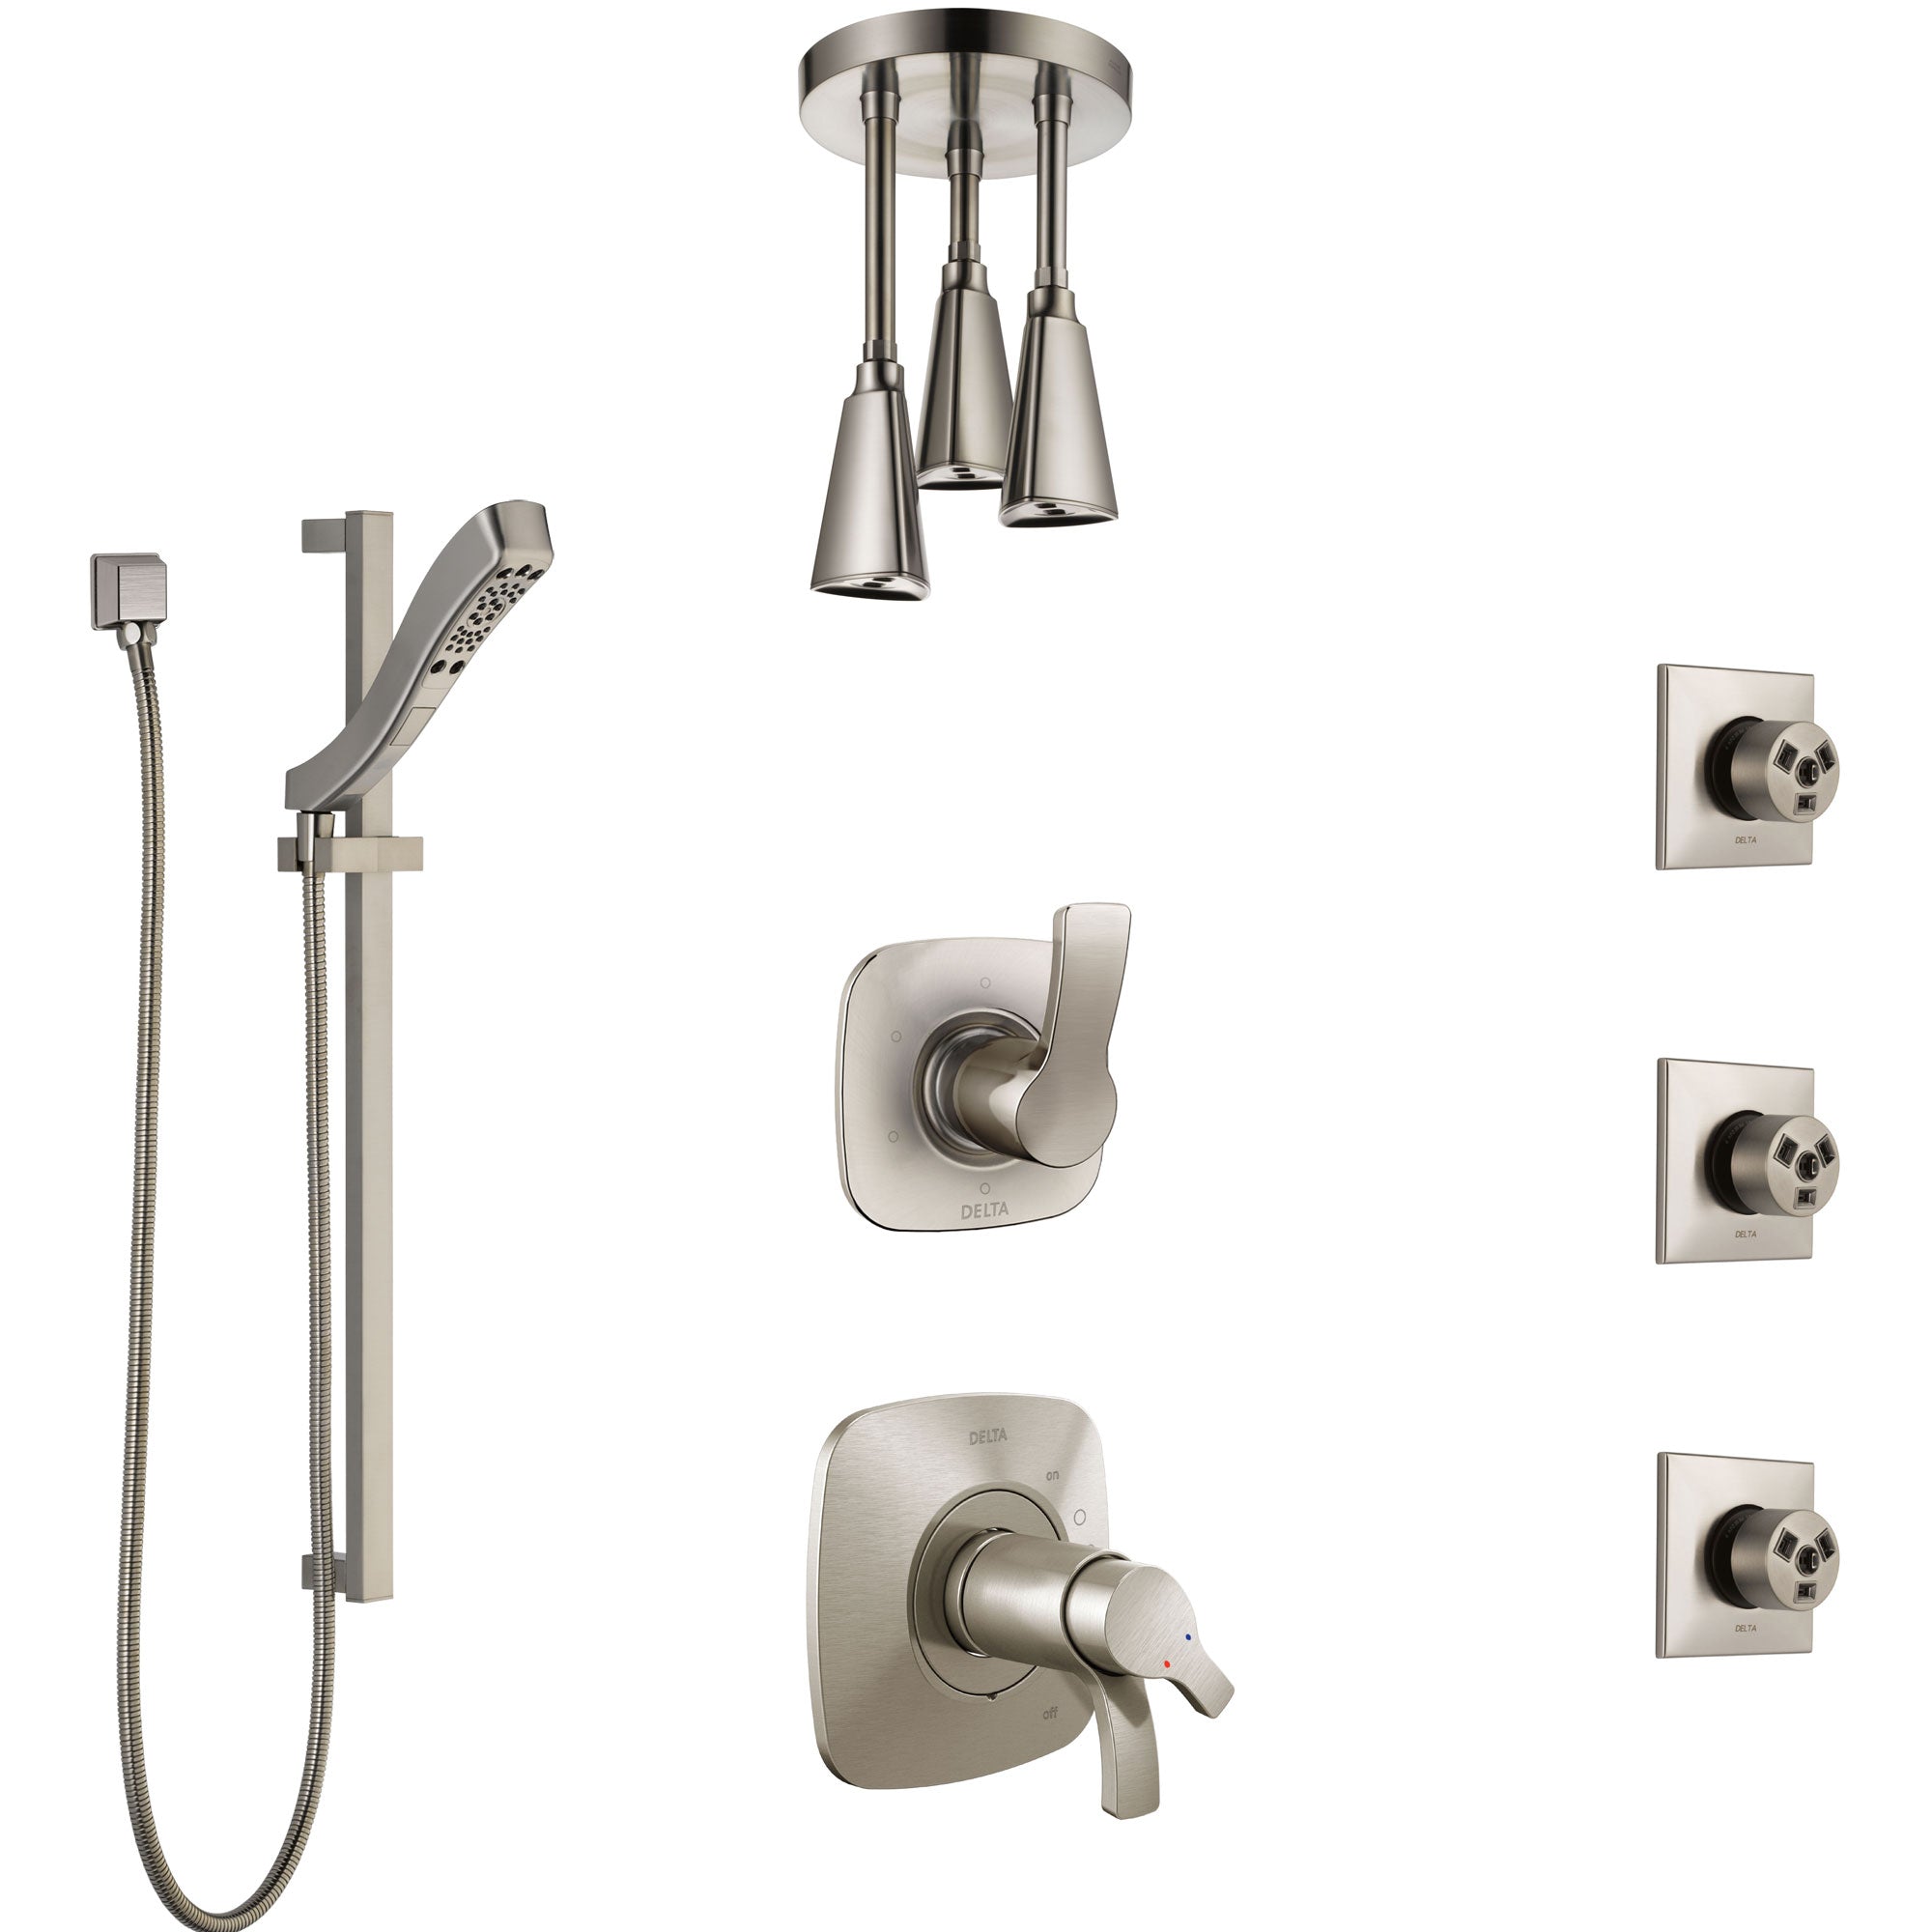 Delta Tesla Dual Thermostatic Control Stainless Steel Finish Shower System, Diverter, Ceiling Showerhead, 3 Body Sprays, and Hand Shower SS17T521SS4